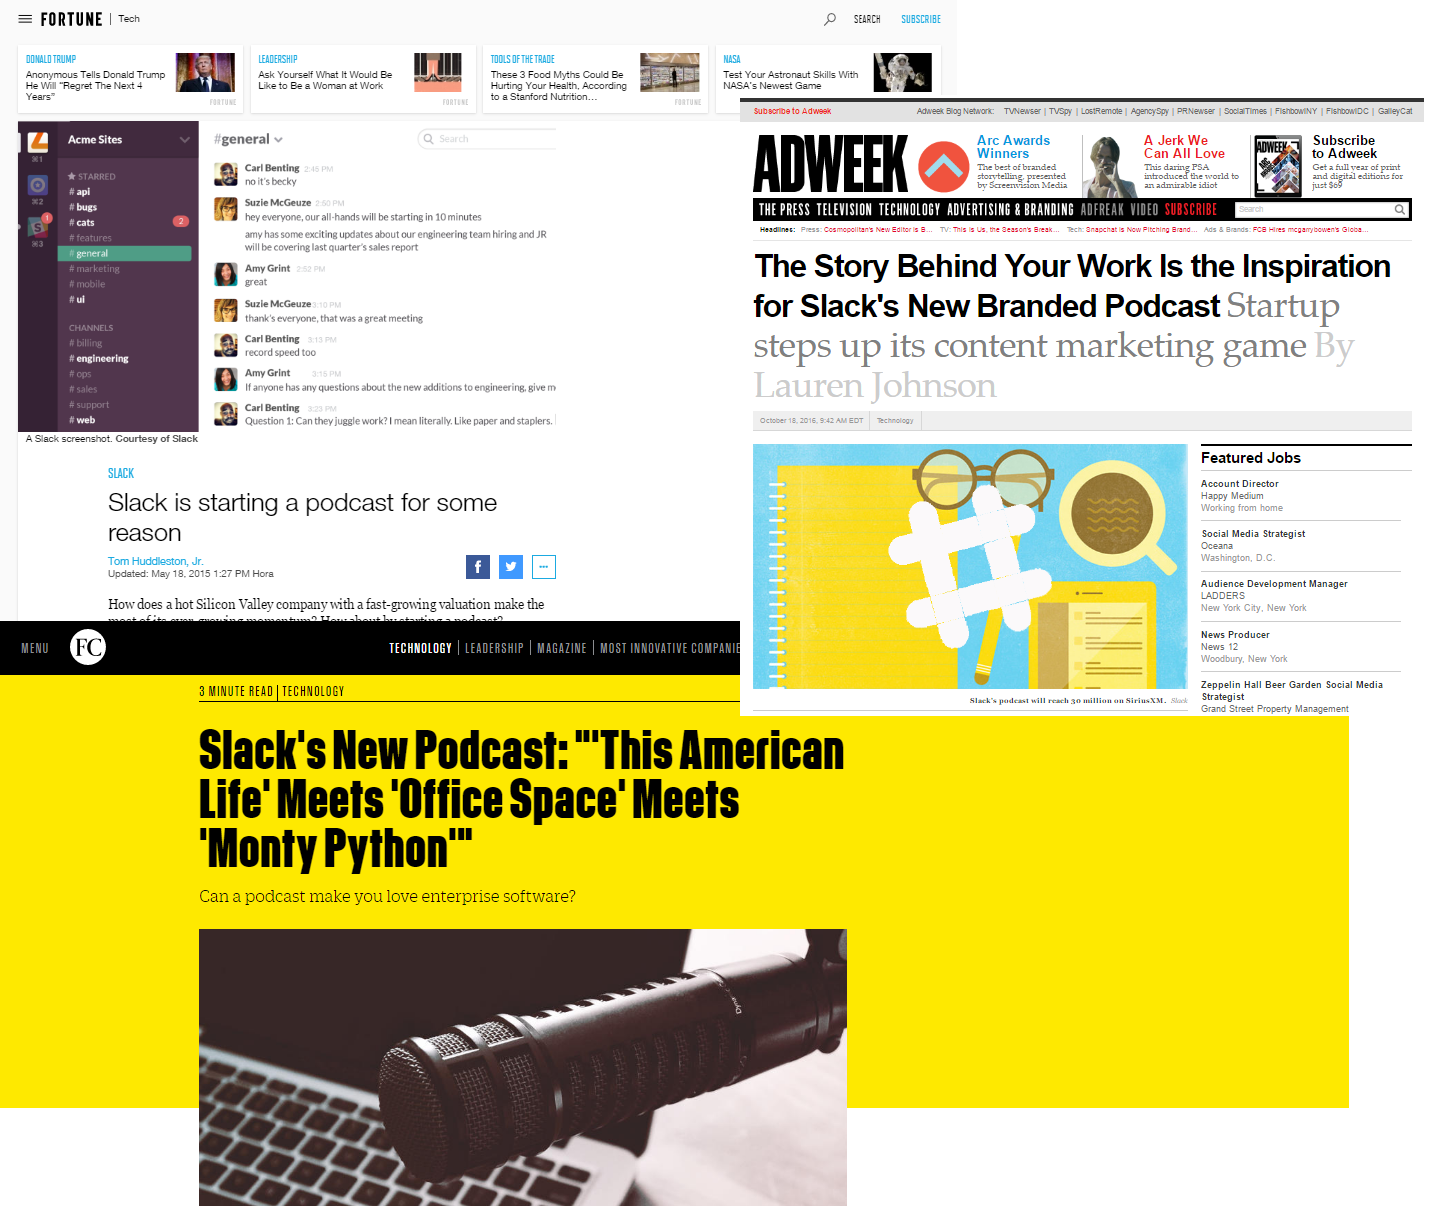 Slack got the attention of the media such as Fortune, AdWeek or Fast Company when it debuted in podcasts. Image: our own file.